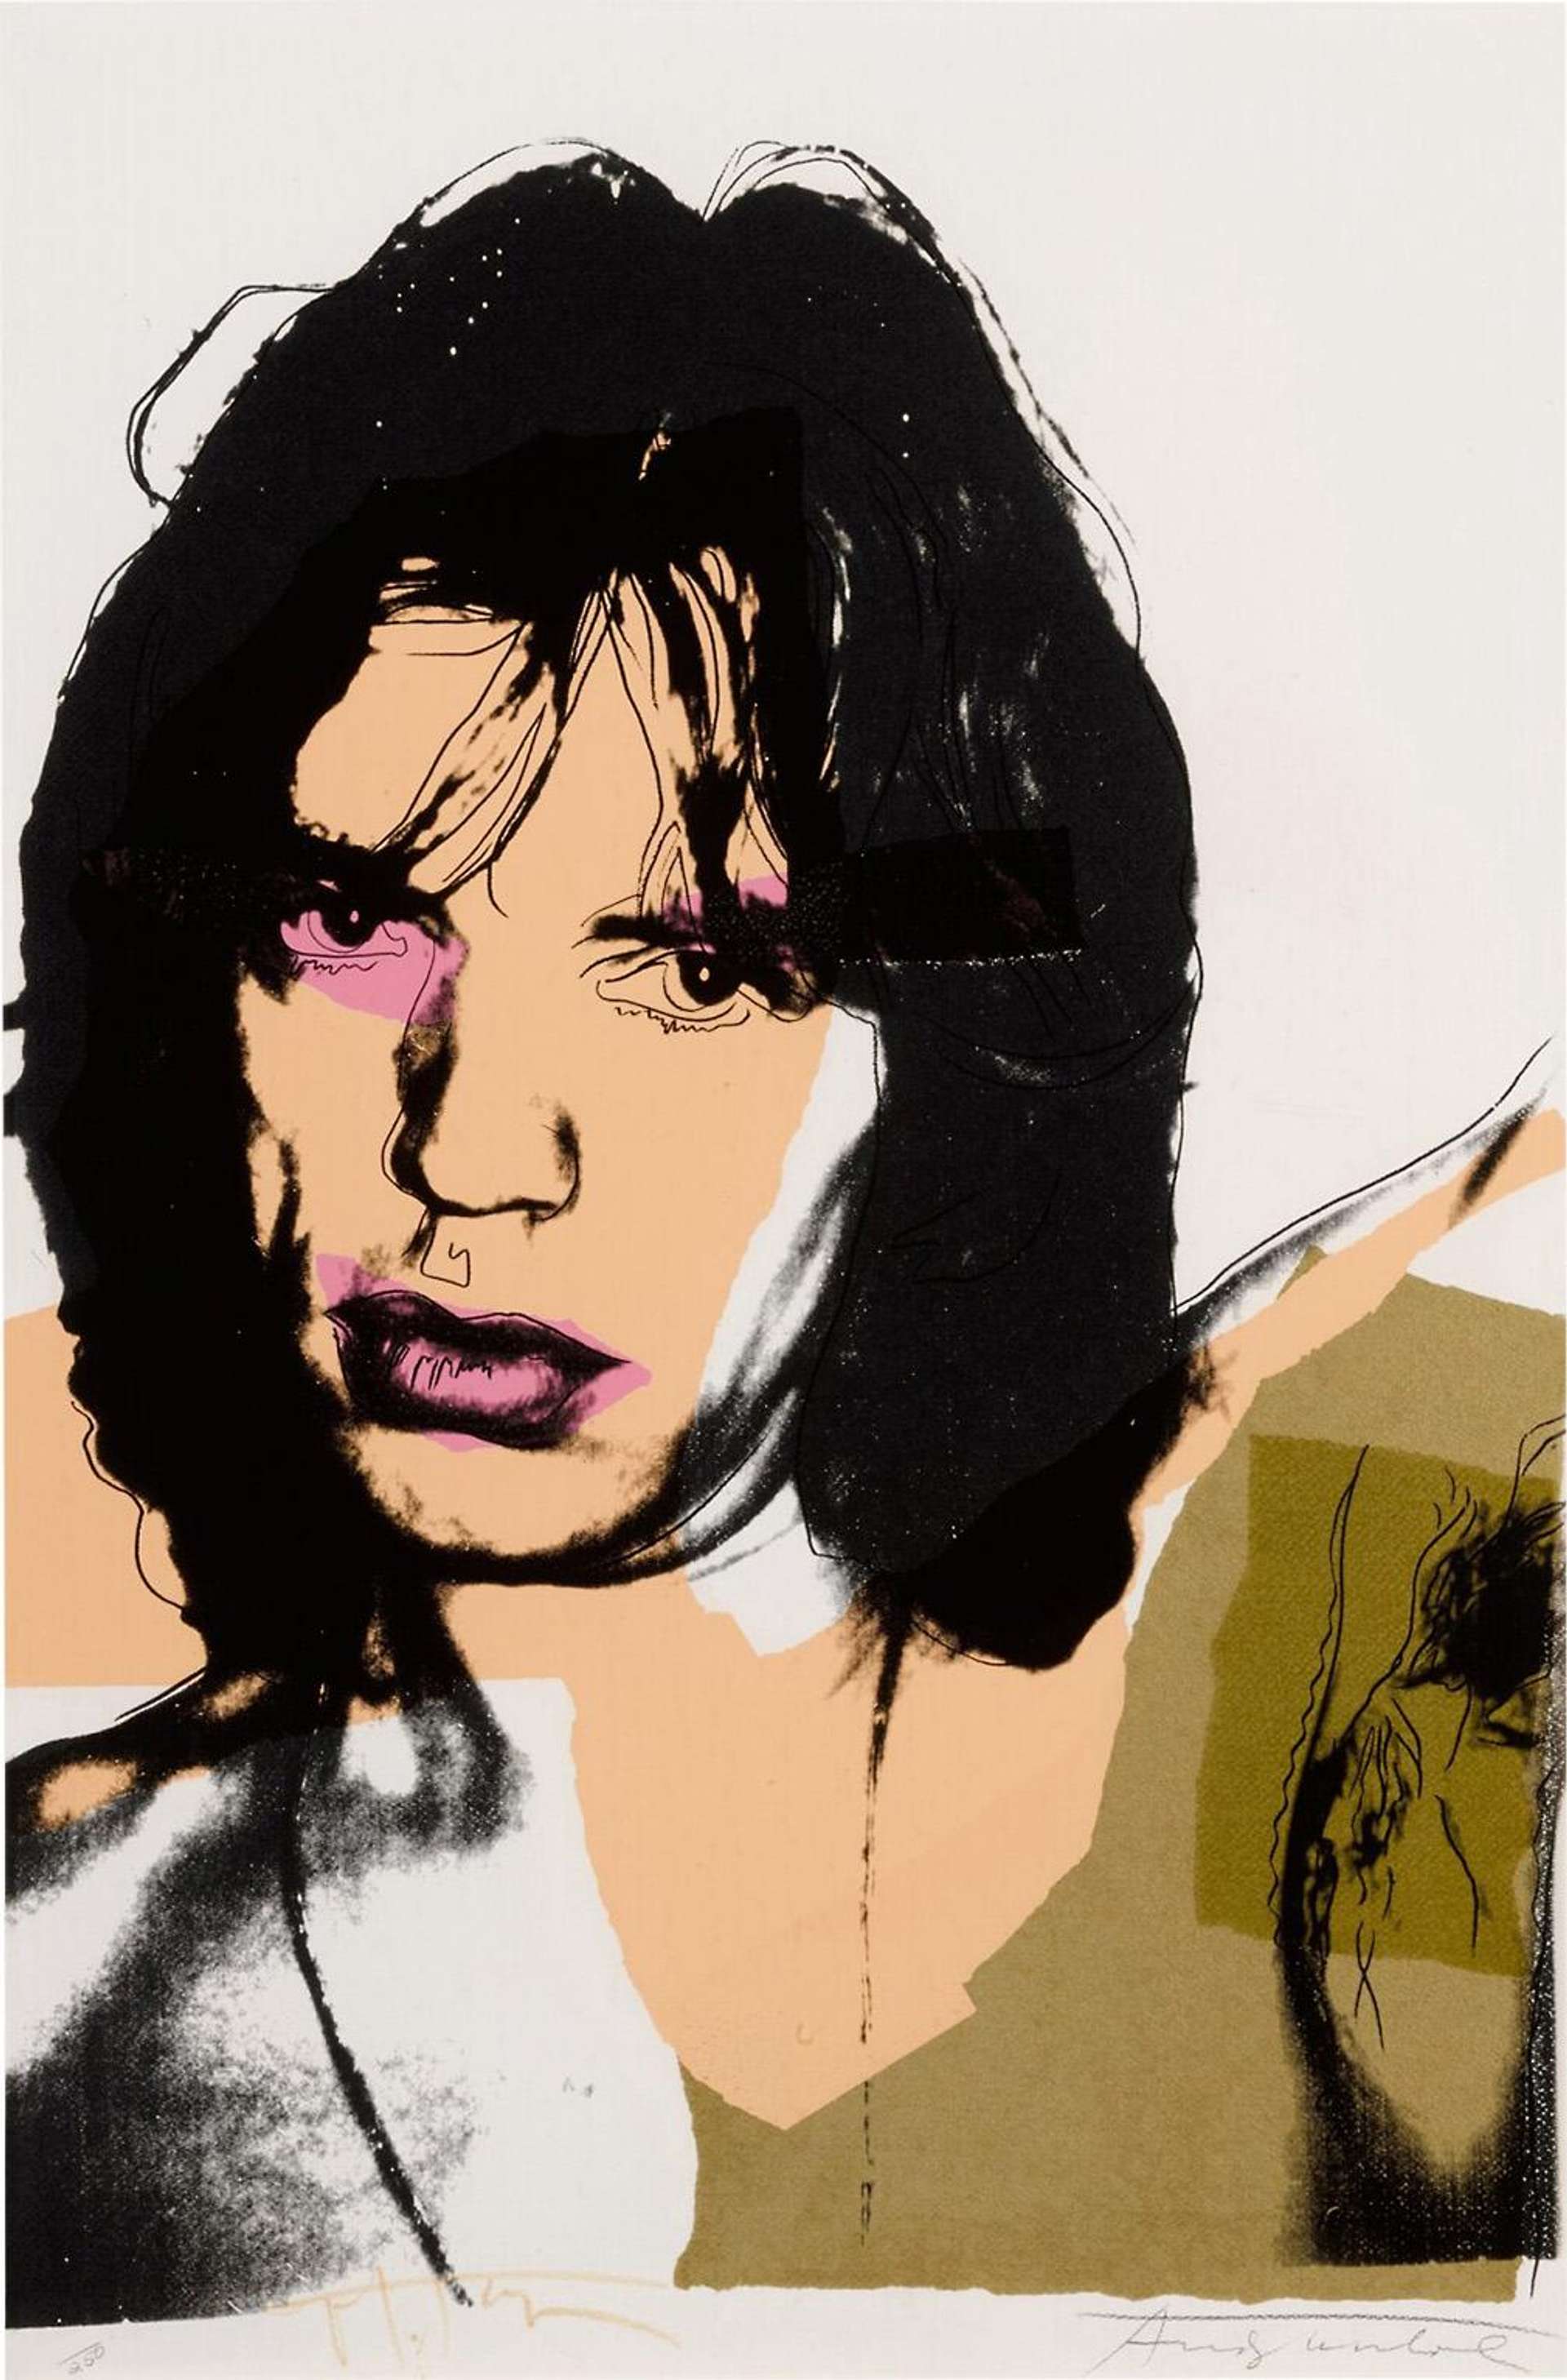 Andy Warhol’s Mick Jagger (F. & S. II.141). A Pop Art screen print of a black and white image of Mick Jagger with the colour pink on his lips and parts of his eyes. The rest of his body has shades of yellow covering him. 